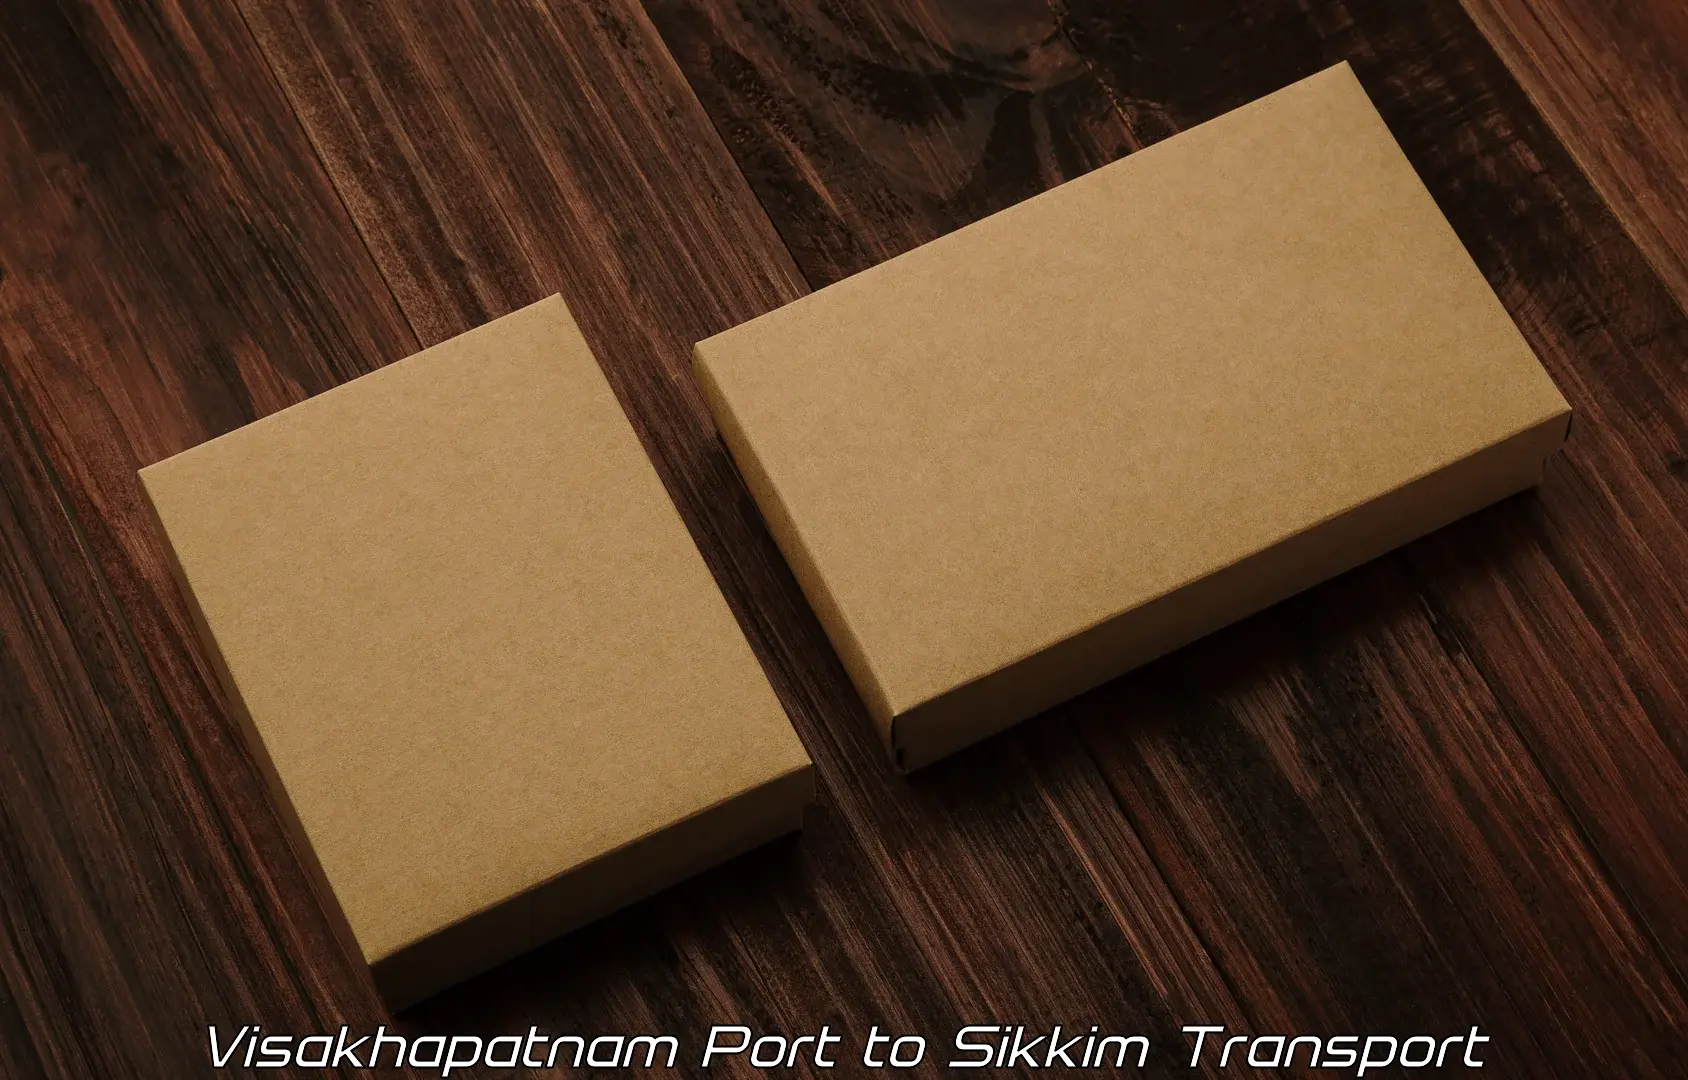 Goods delivery service Visakhapatnam Port to Sikkim